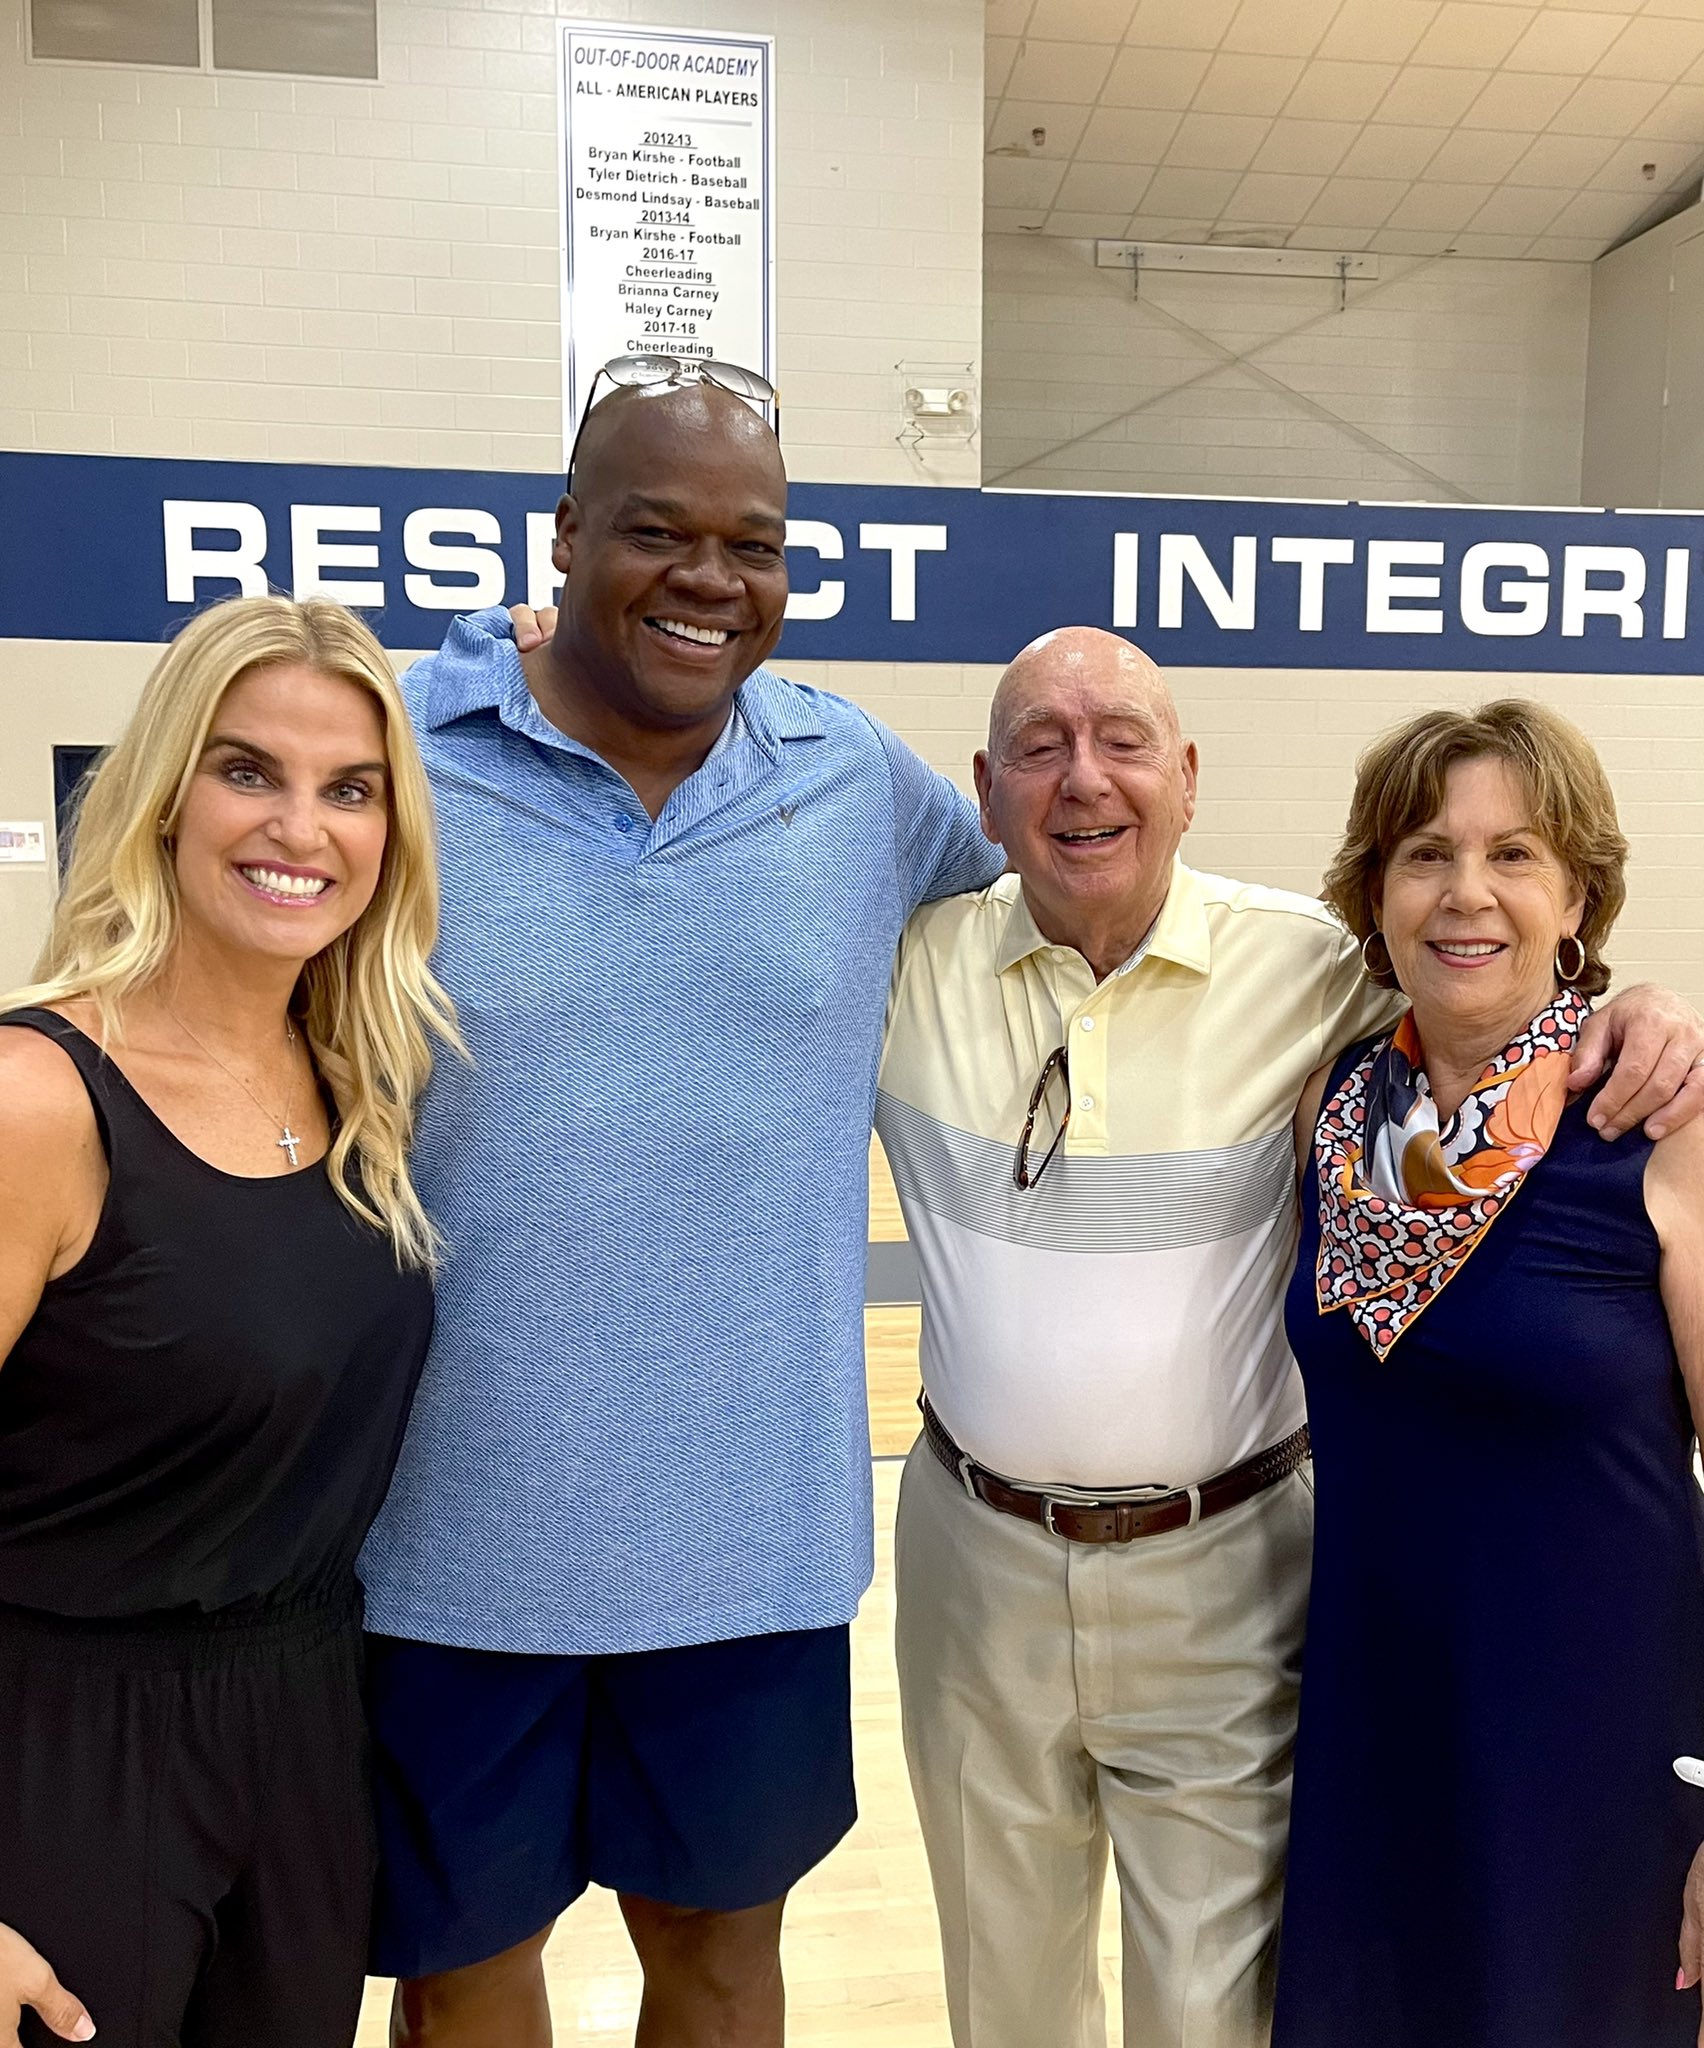 Dick Vitale on X: Had a blast speaking to ALL the students of @Outofdoor  in Lakewood Ranch, Fl . Shared time with classy Hall of Famer FRANK THOMAS  & his wife Megan .